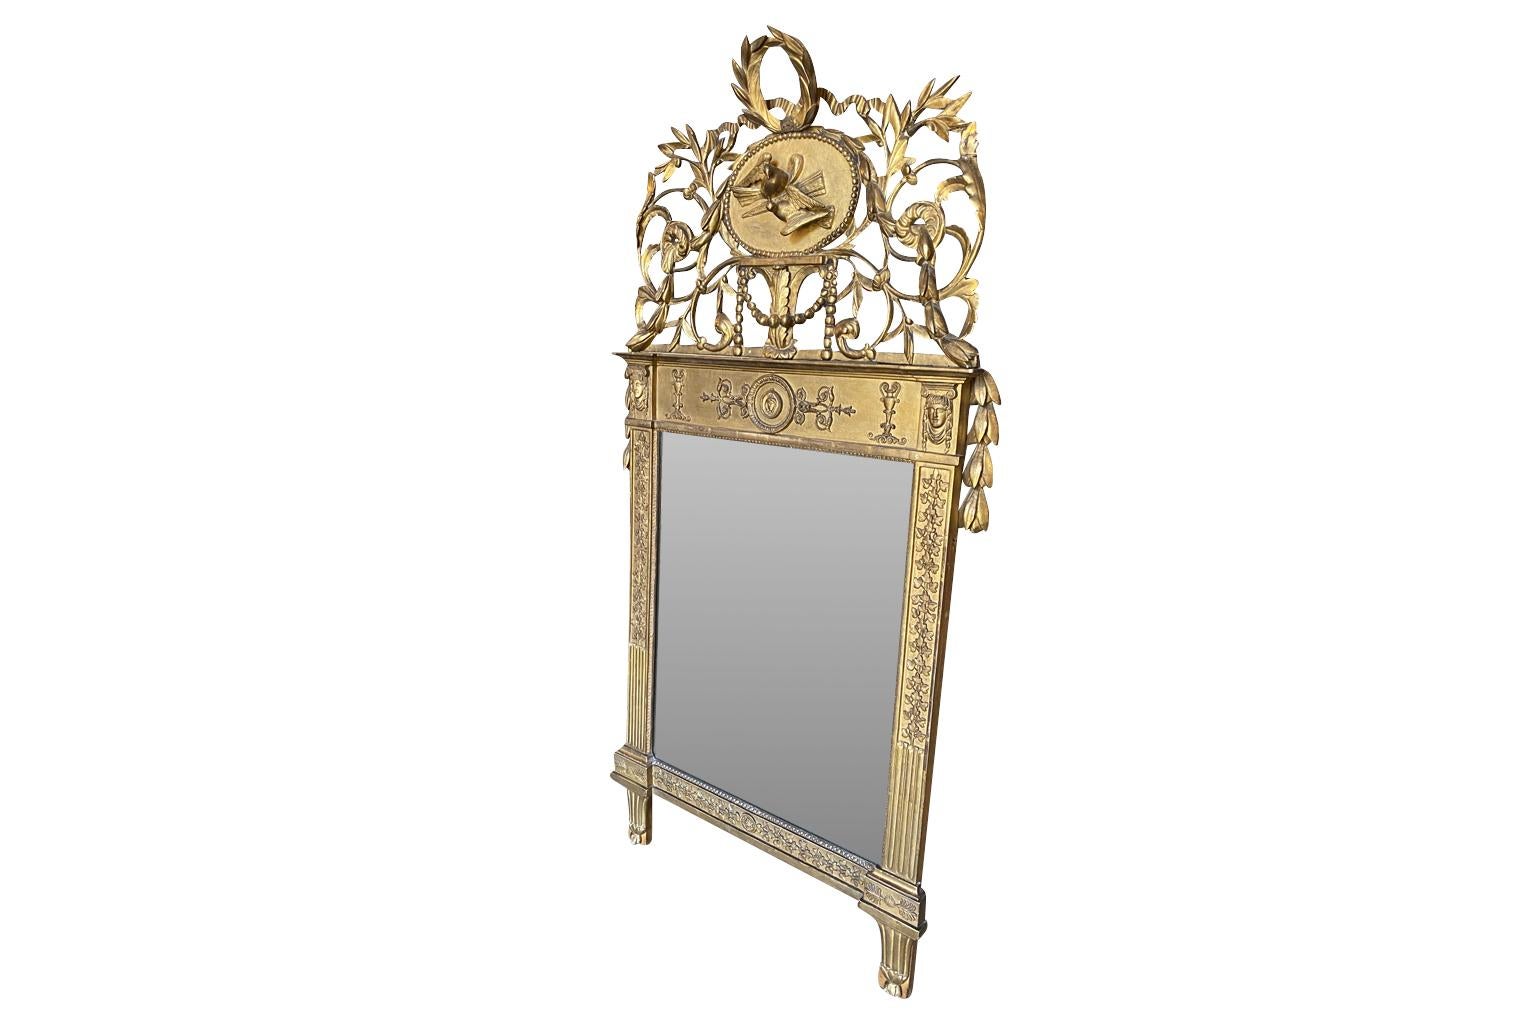 A stunning Transition Louis XVI to Empire Mirror from the Piedmont region of Italy. Magnificently crafted from giltwood. The pediment is adorned with wedding doves and a crown of laurel and garlands. The frame is adorned with carved oak leaves and